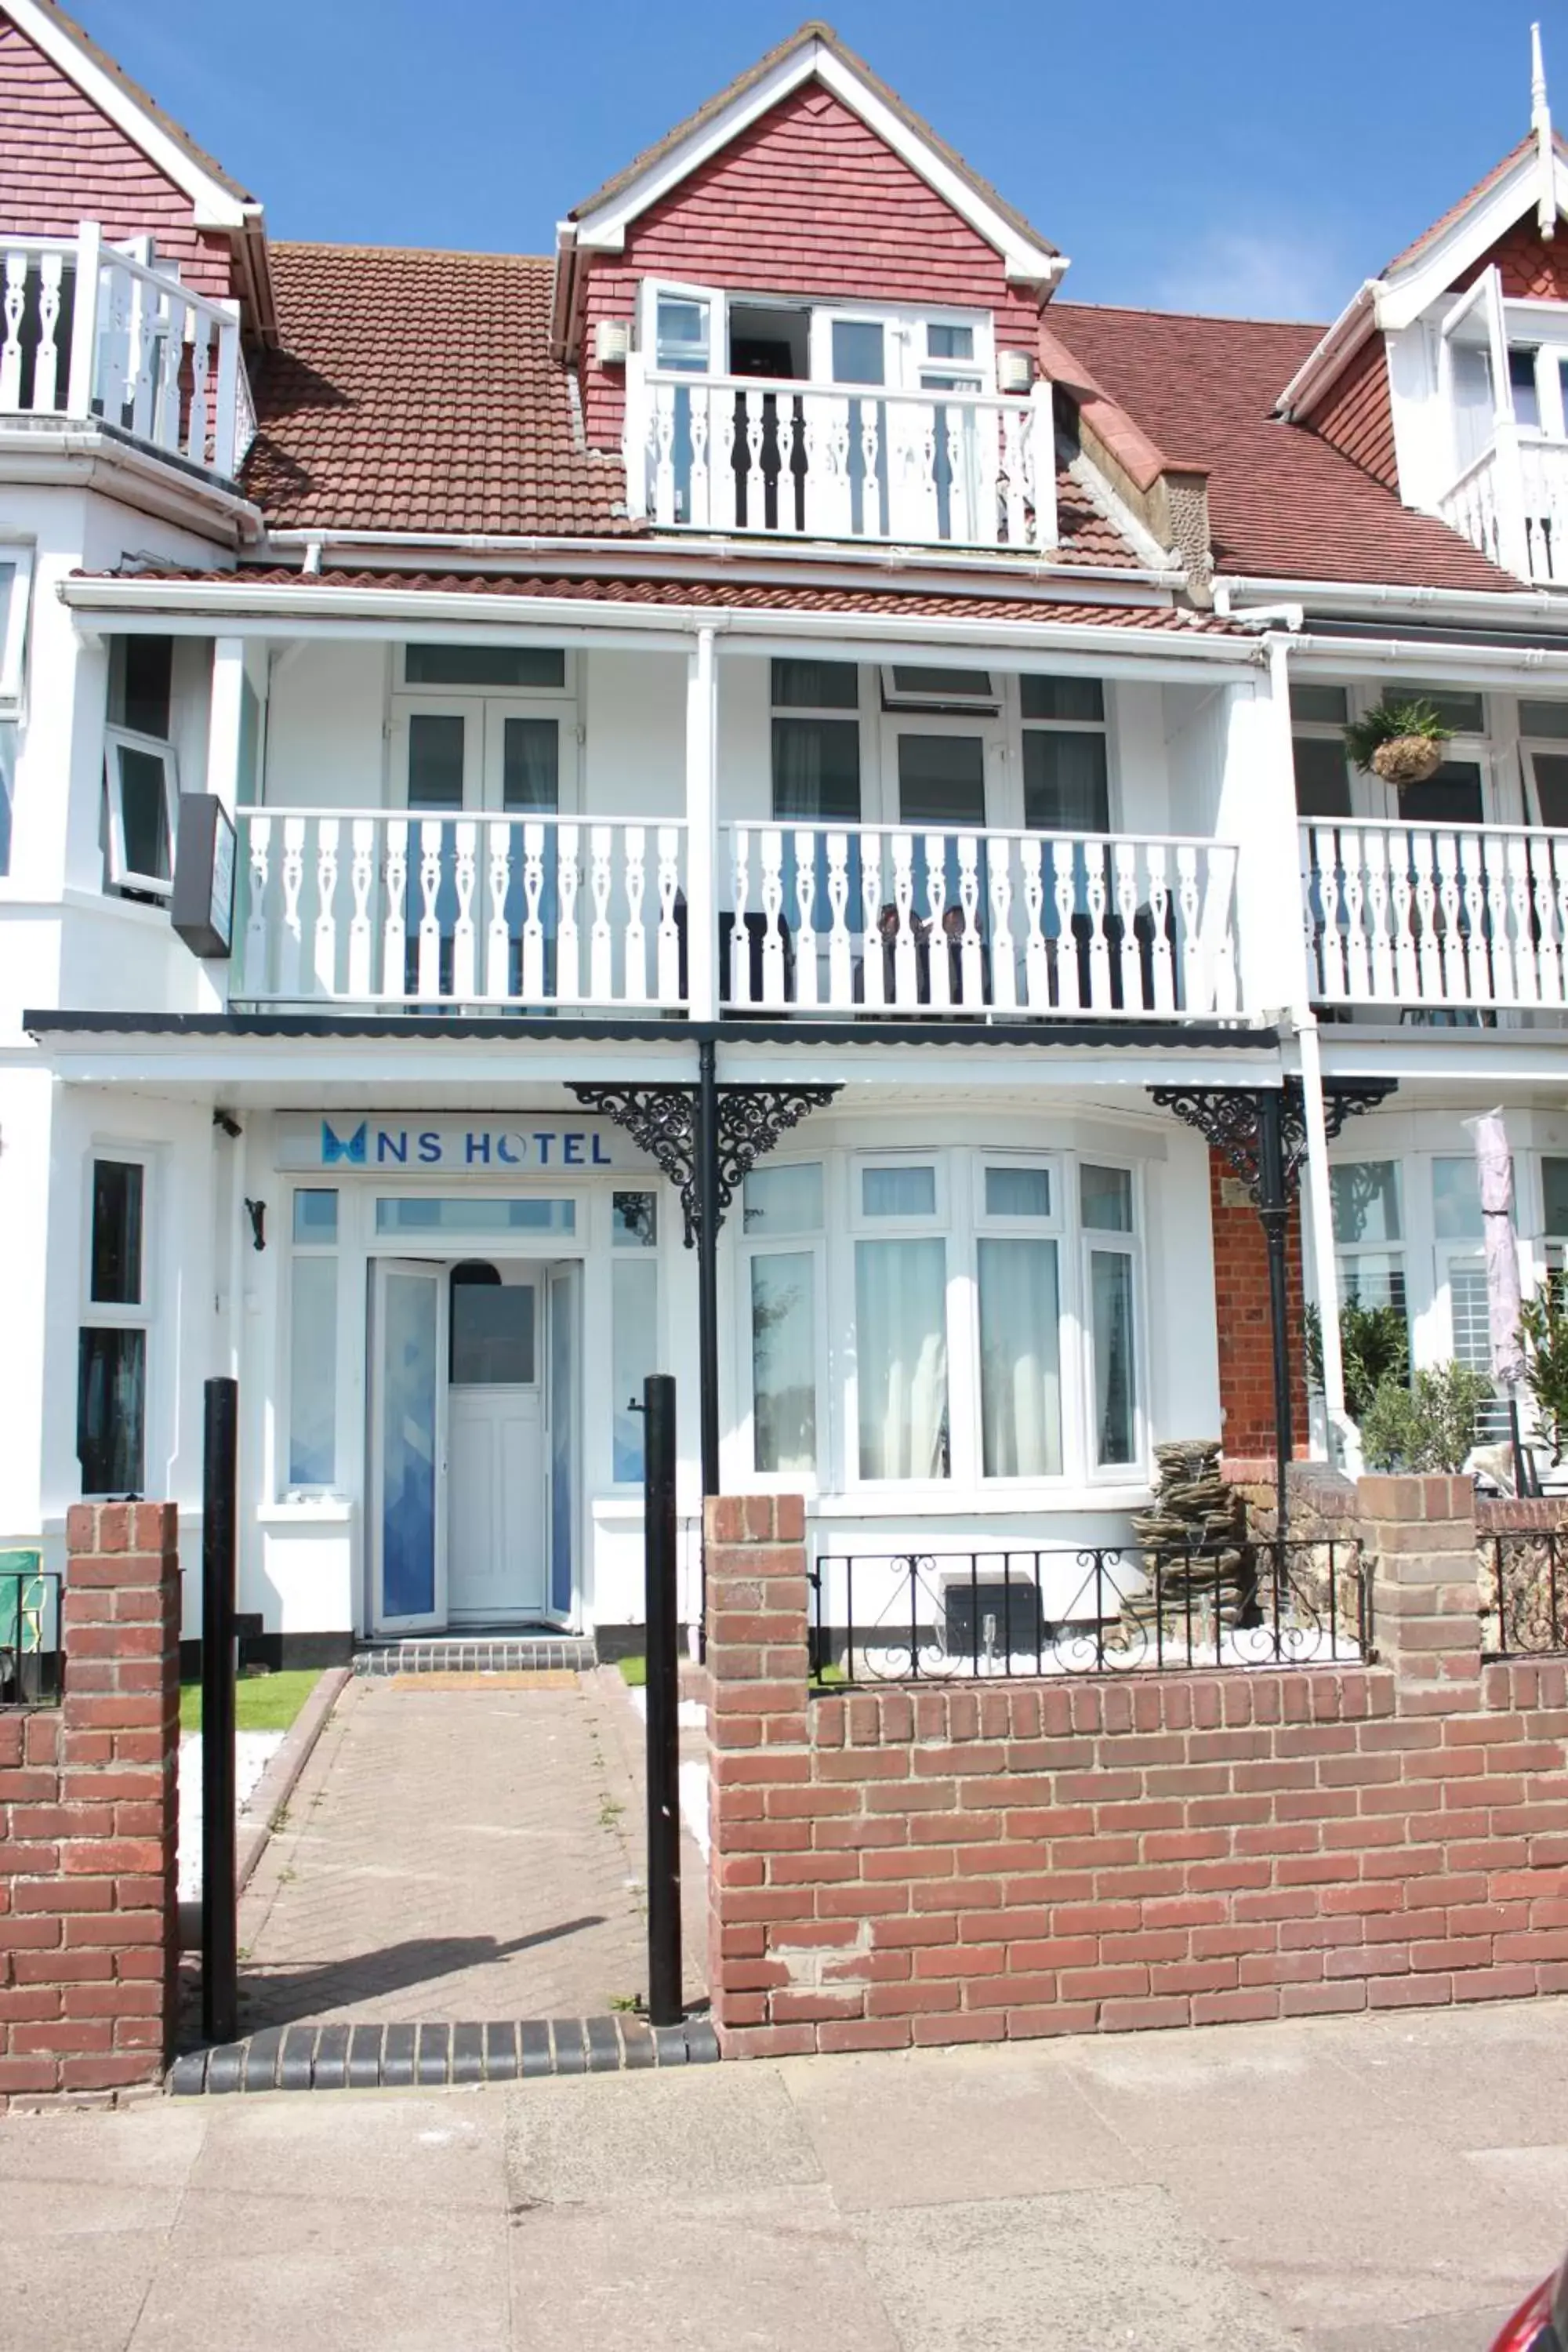 Property Building in Wns Southend -on-Sea